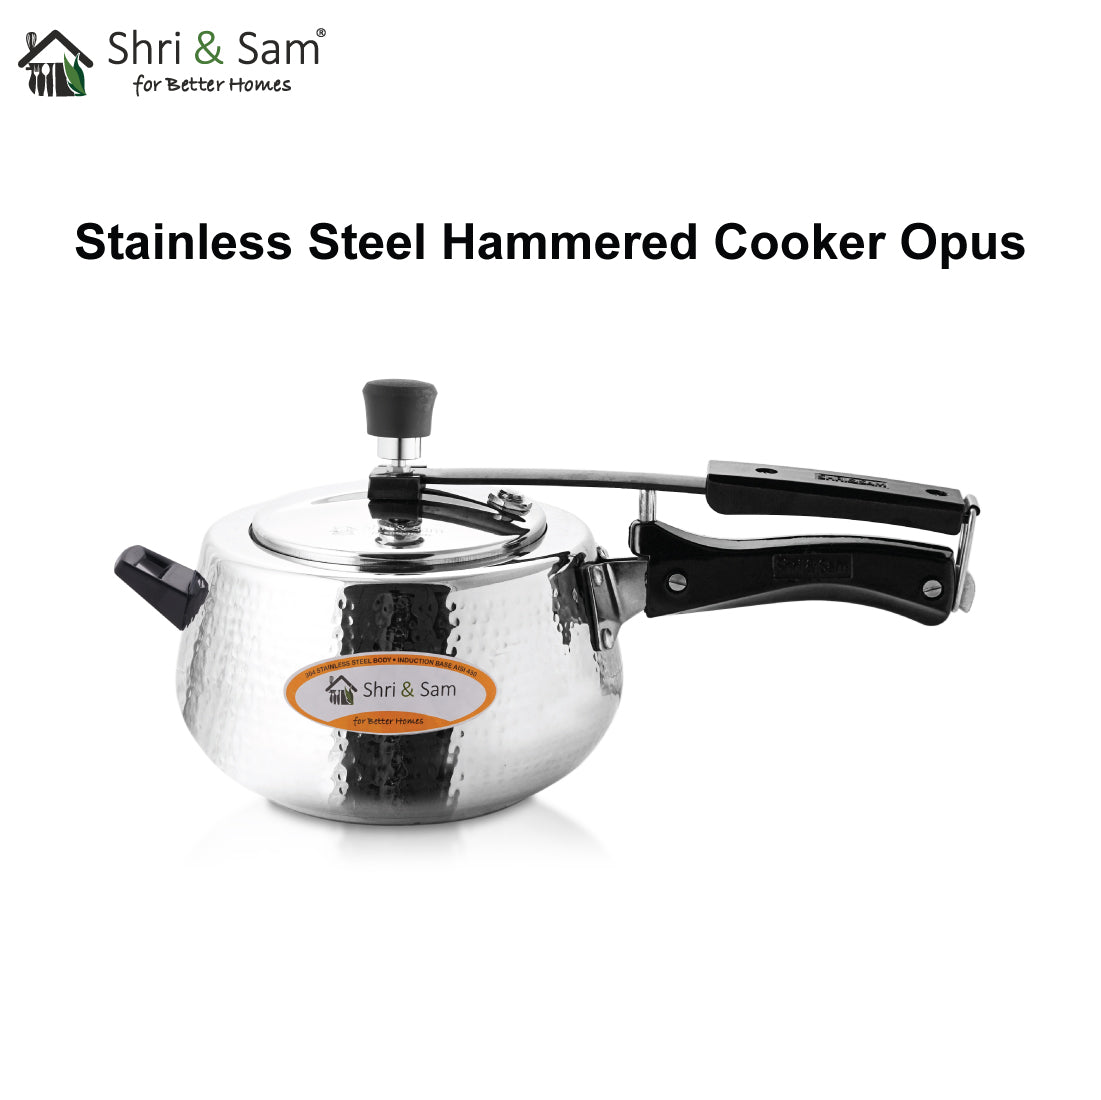 Stainless Steel Hammered Cooker Opus